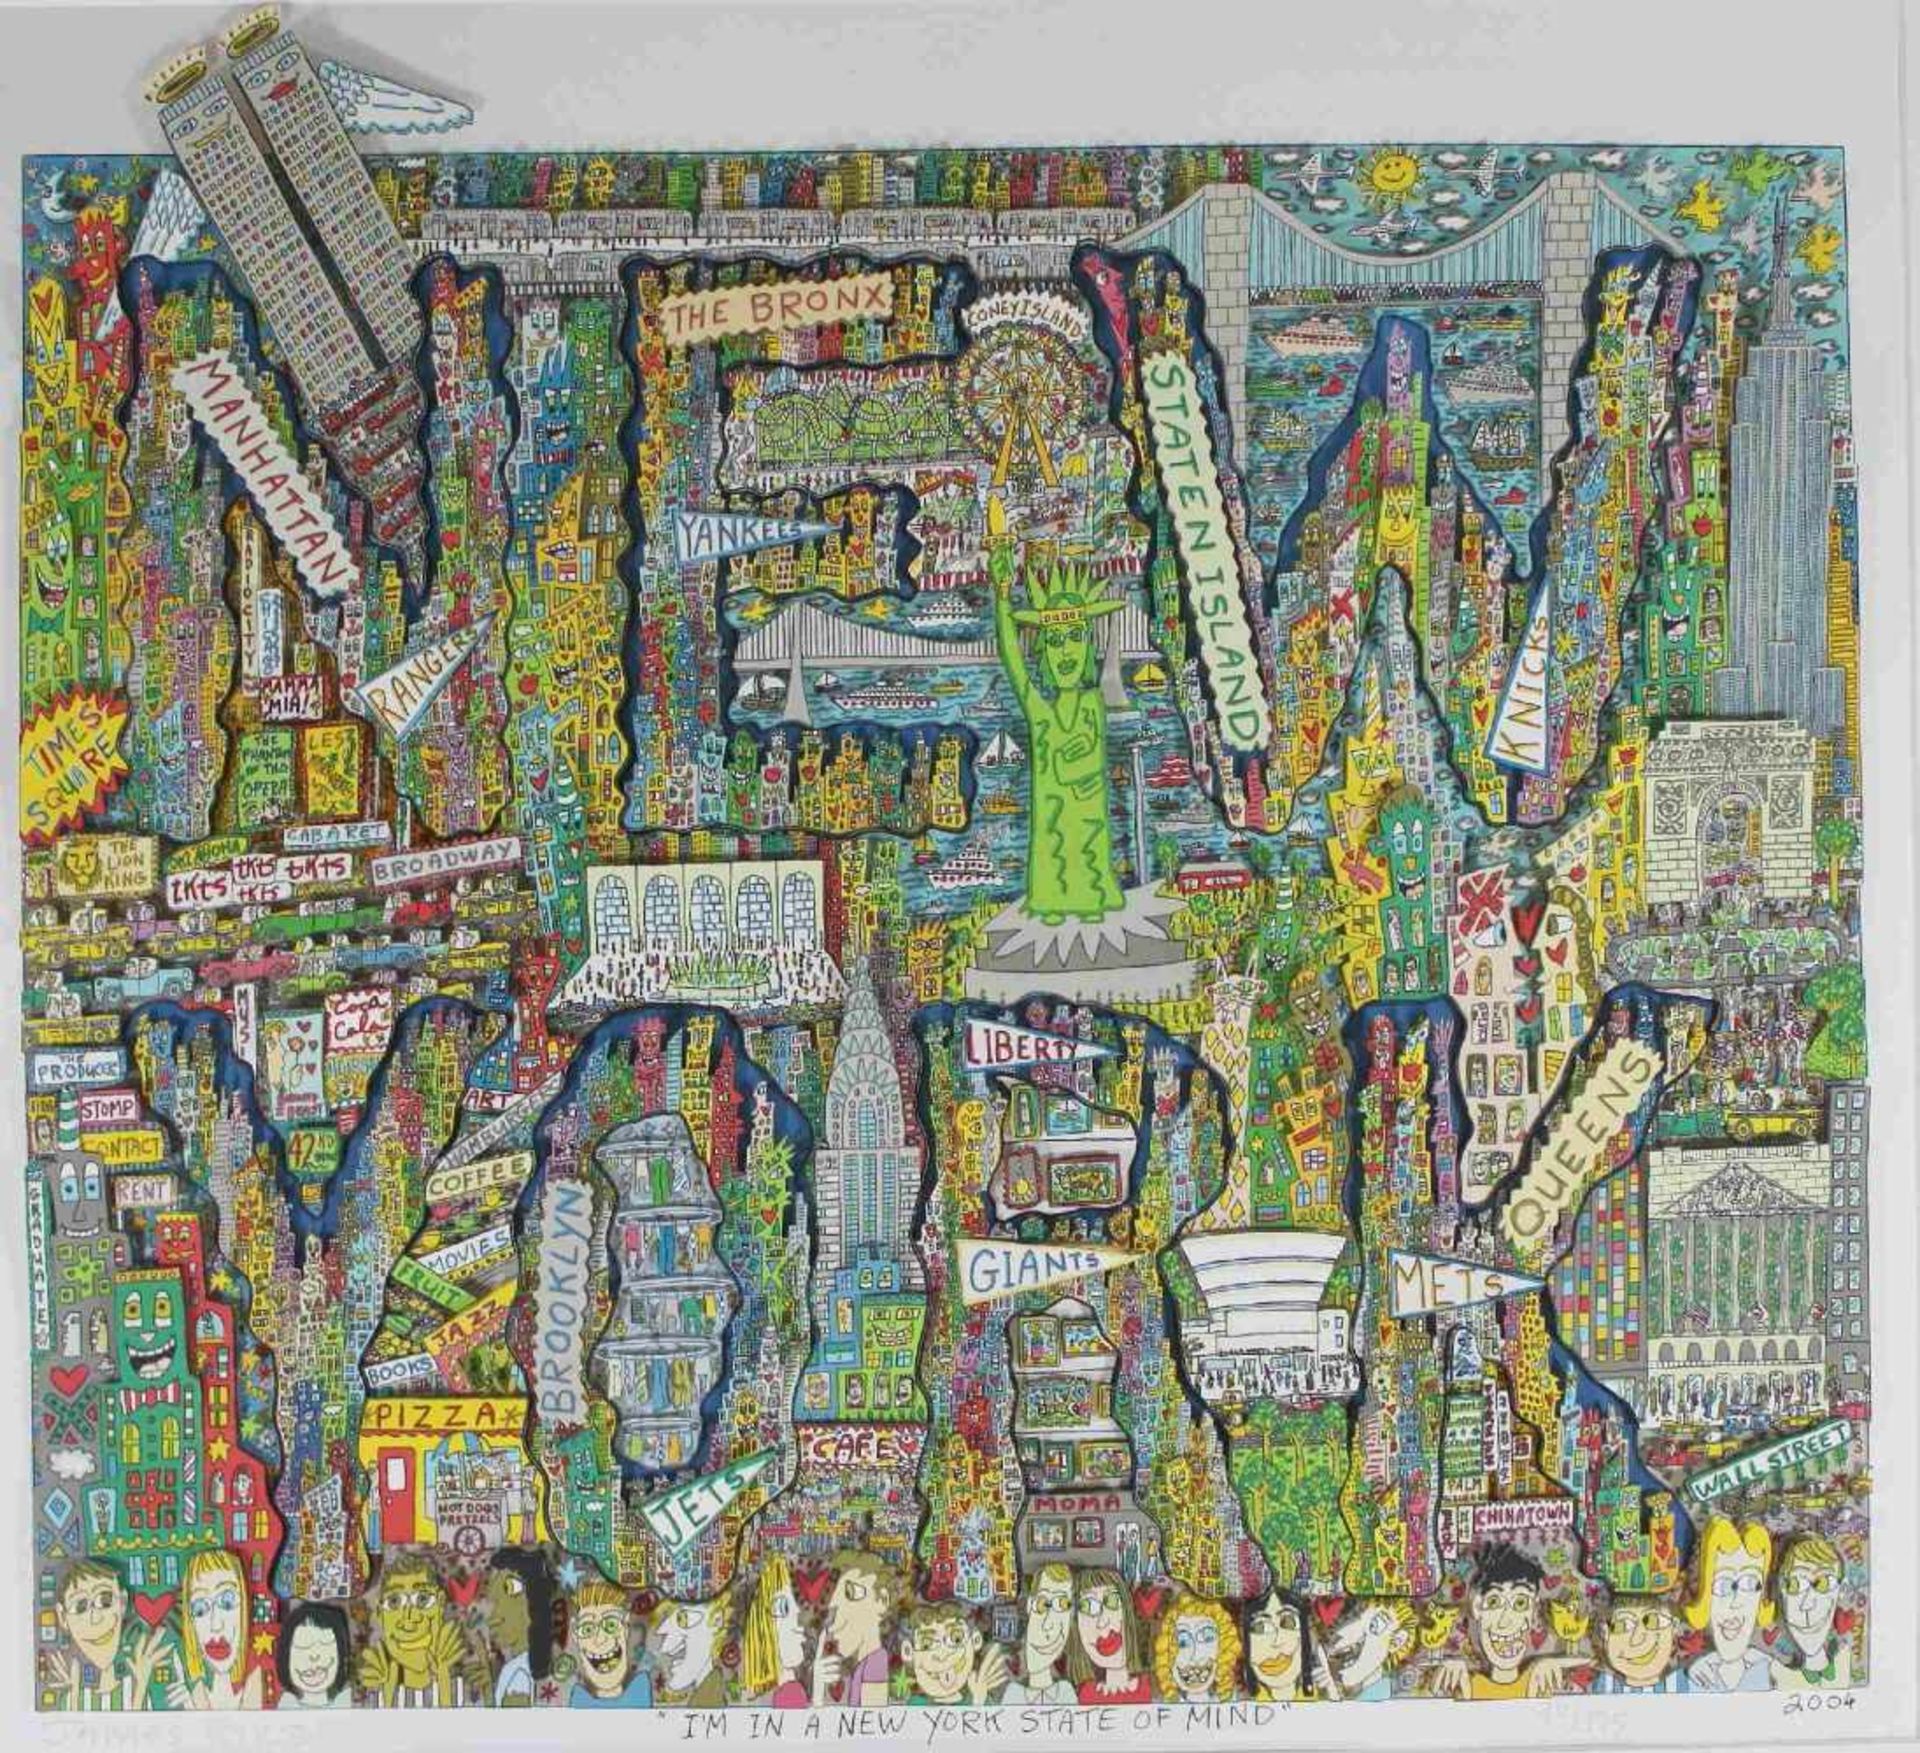 James Rizzi (1950 - 2011), I m in a New York State of Mind, 2004, 3-D Lithografie in Farbe, im Stein